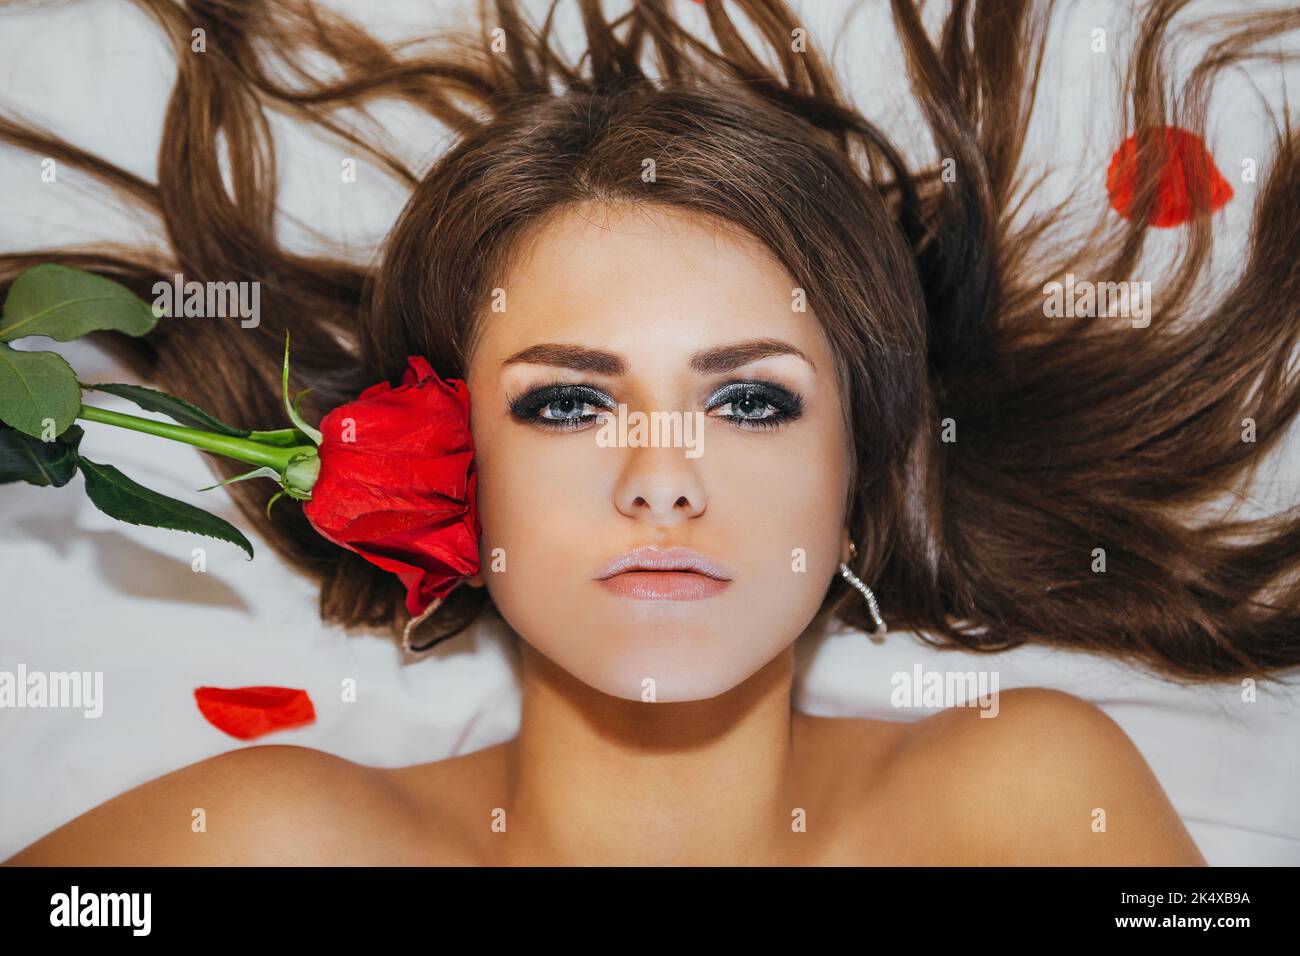 Portrait (taken from above) of sensual brunette girl on a white sheet with rose petals, holding a red rose near her face; her hair is spread out Stock Photo